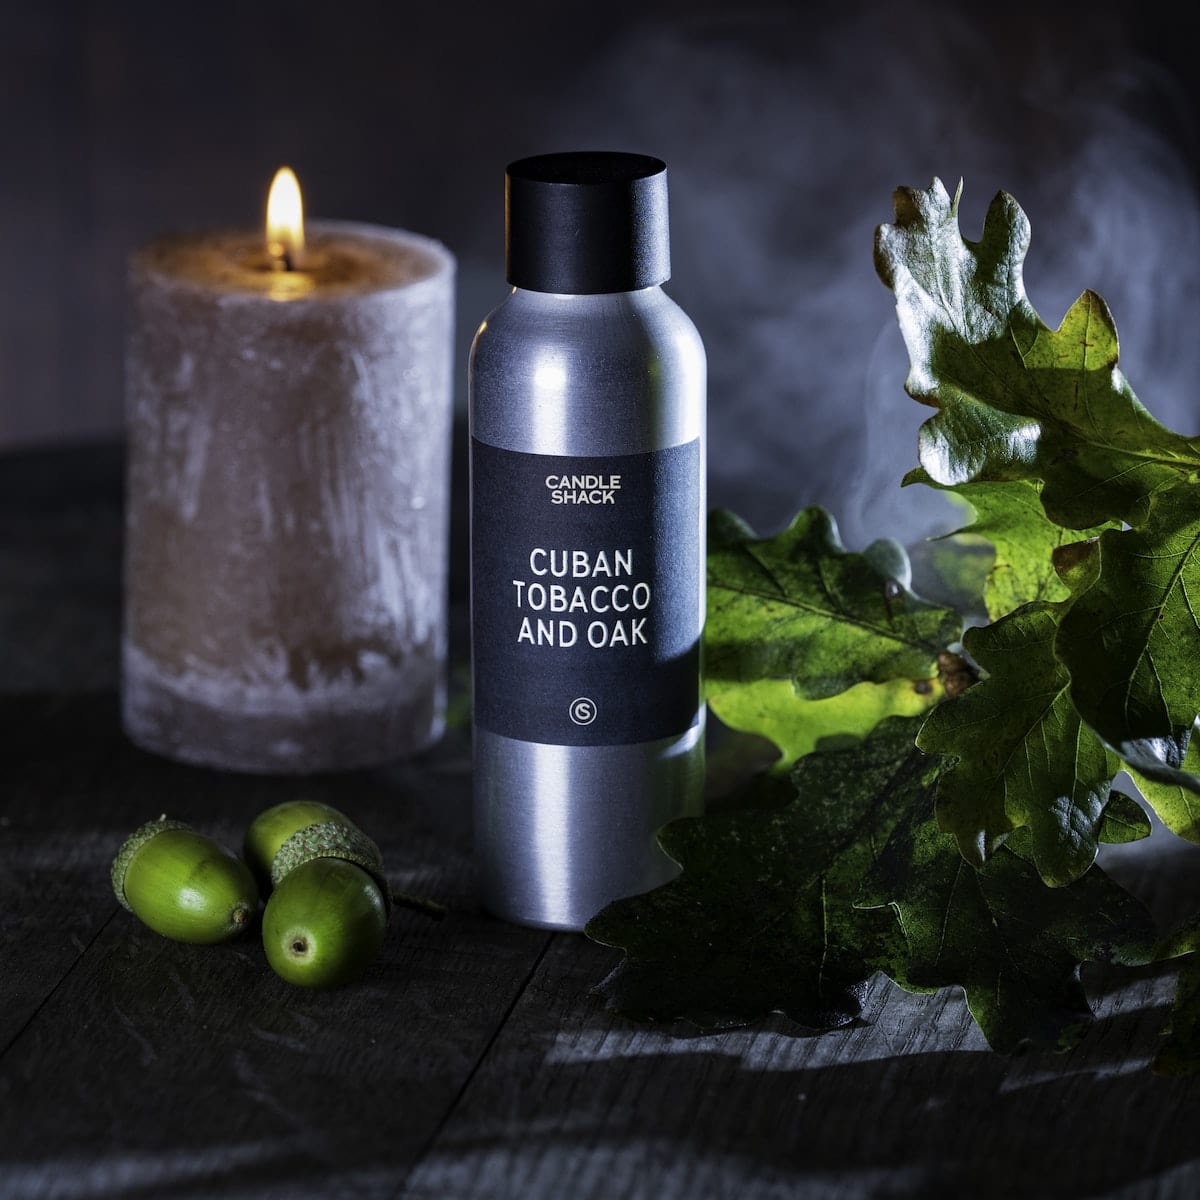 Different ways to brand your Cuban Tobacco & Oak Home Fragrance Products